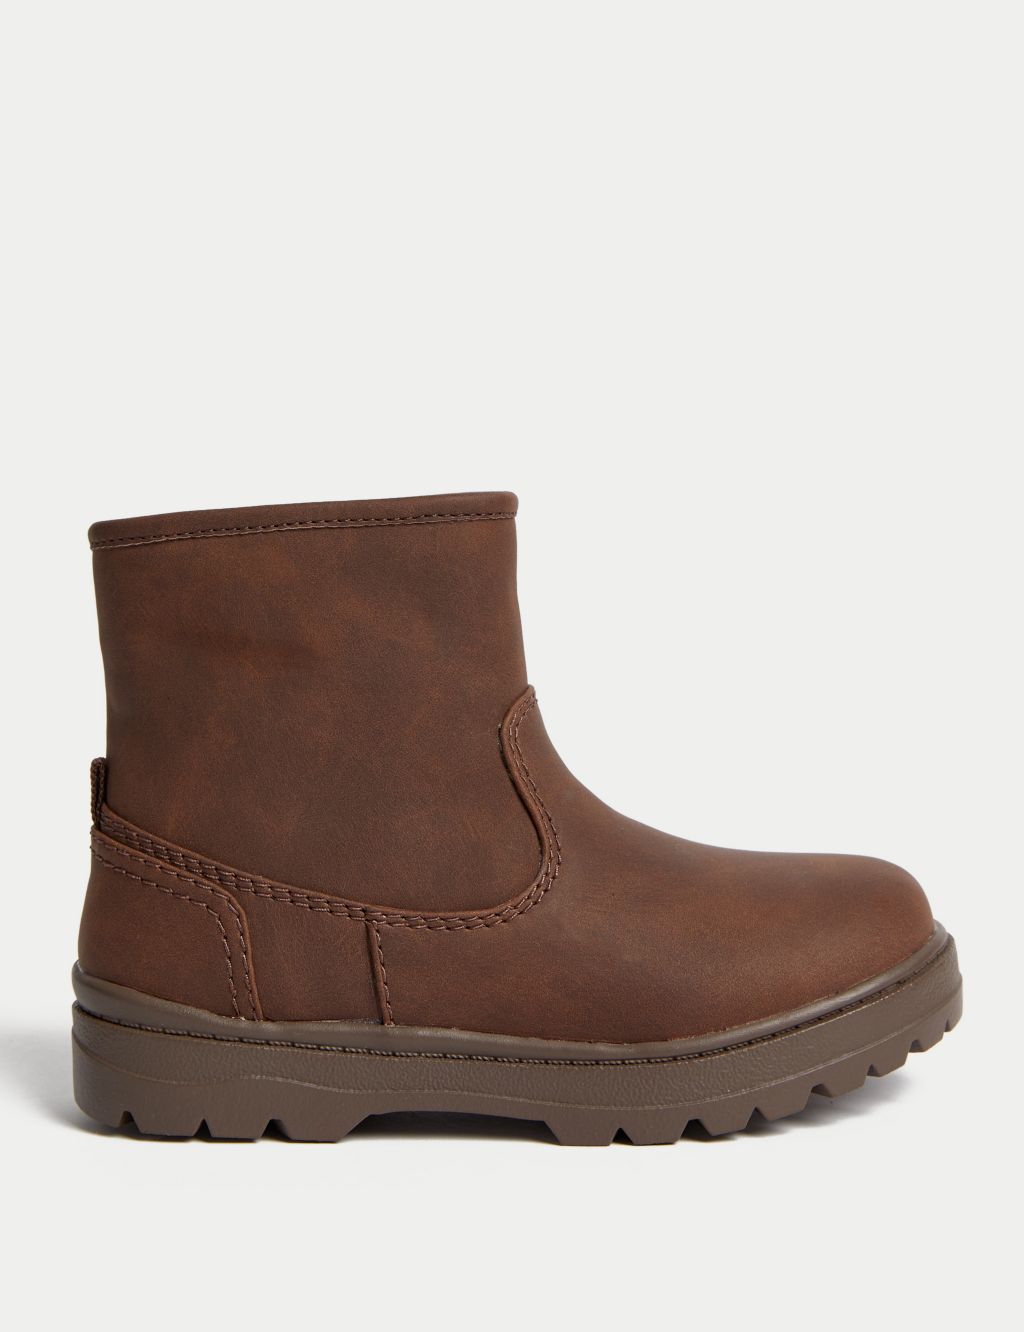 Kids’ Freshfeet™ Chelsea Boots (4 Small - 13 Small) image 1